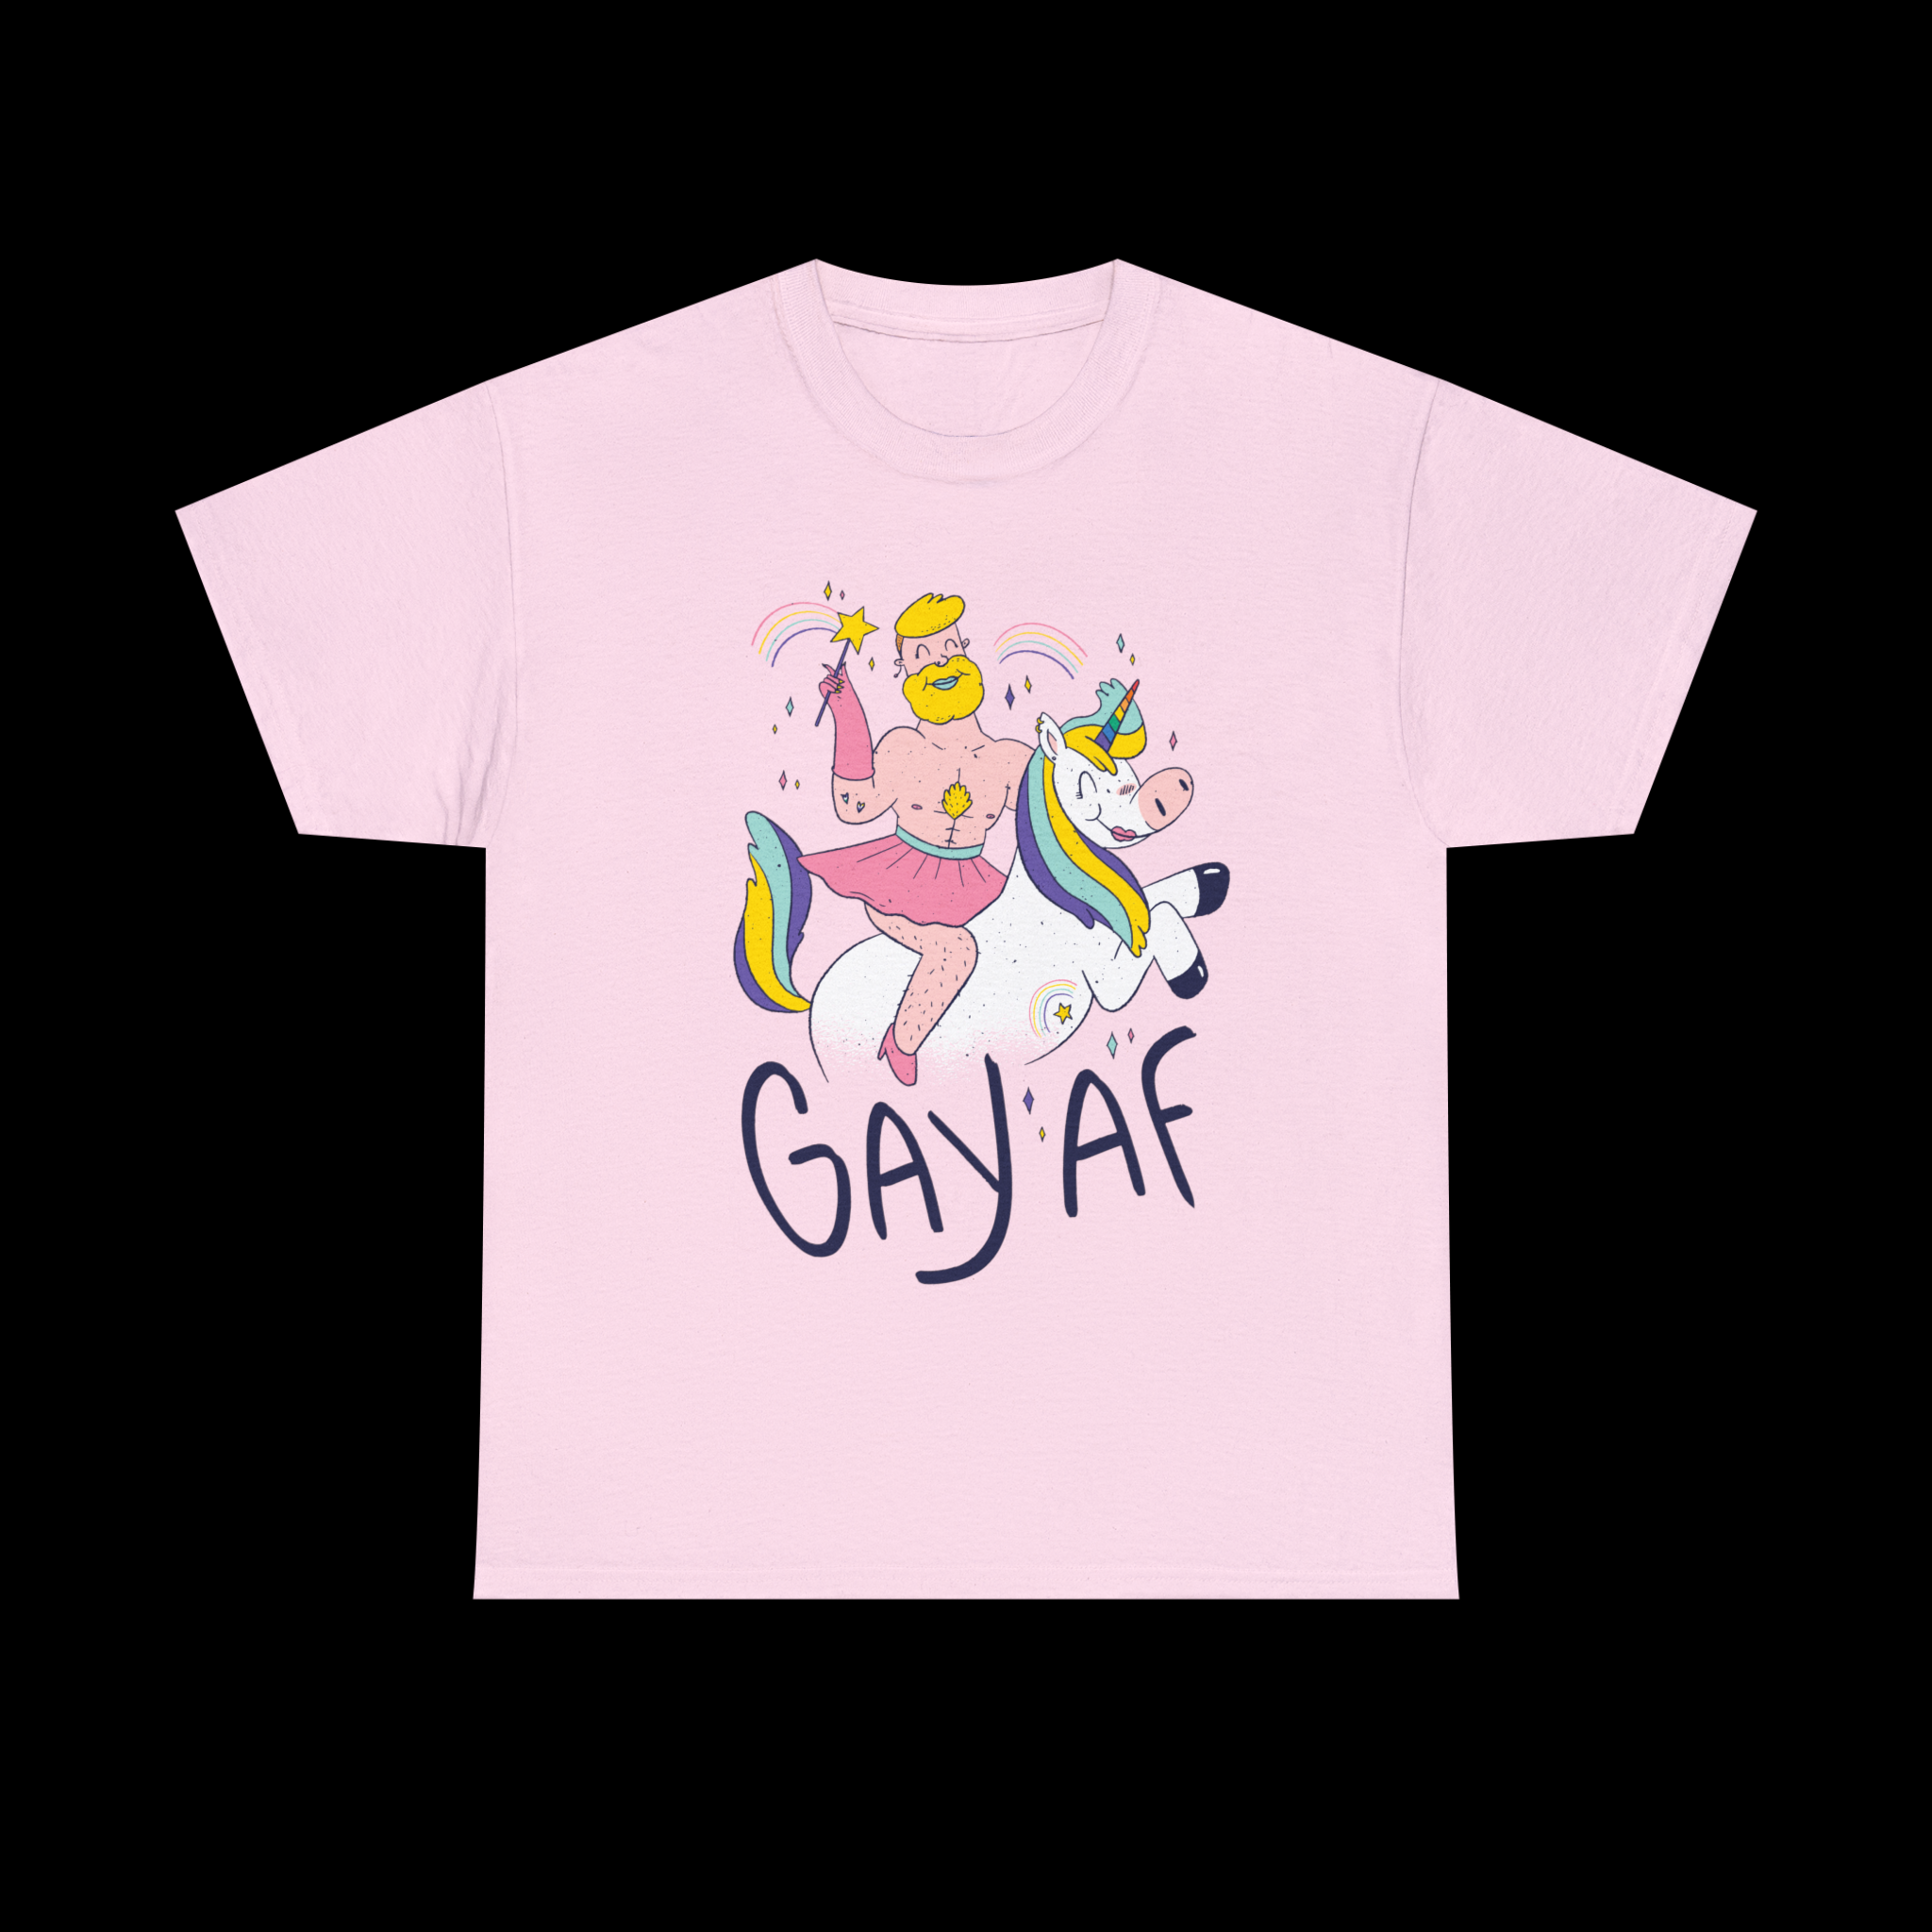 This GAYAF T-Shirt, made of 100% cotton, features a picture of a man riding a unicorn.